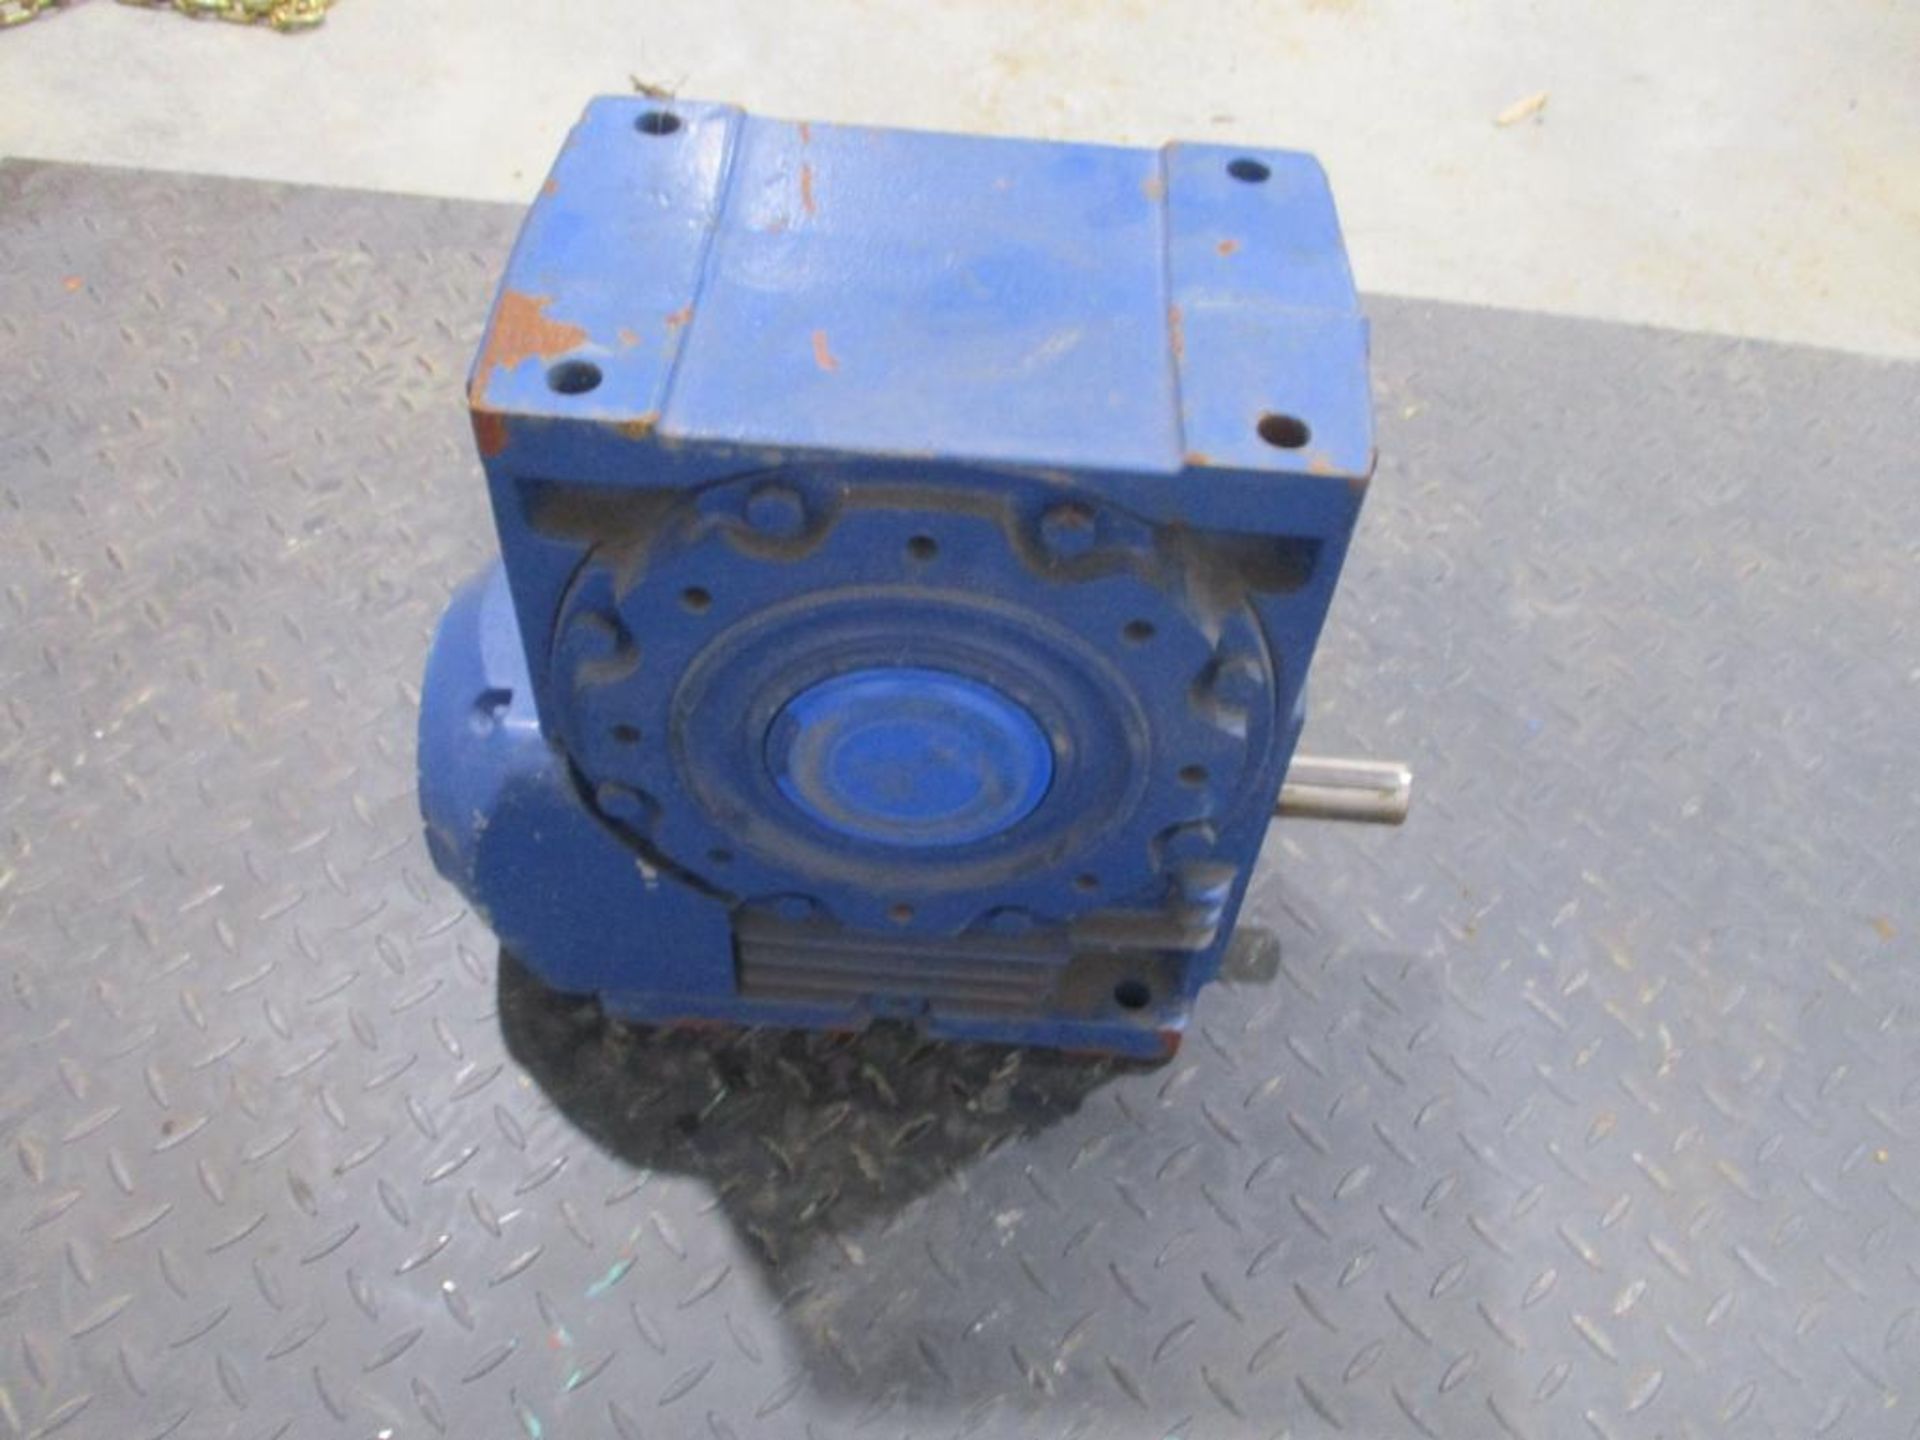 ROSSI MOTORIDUTTORI 16 RATIO REDUCER P/N RV125U02A, 163# lbs (There will be a $40 Rigging/Prep fee a - Image 3 of 5